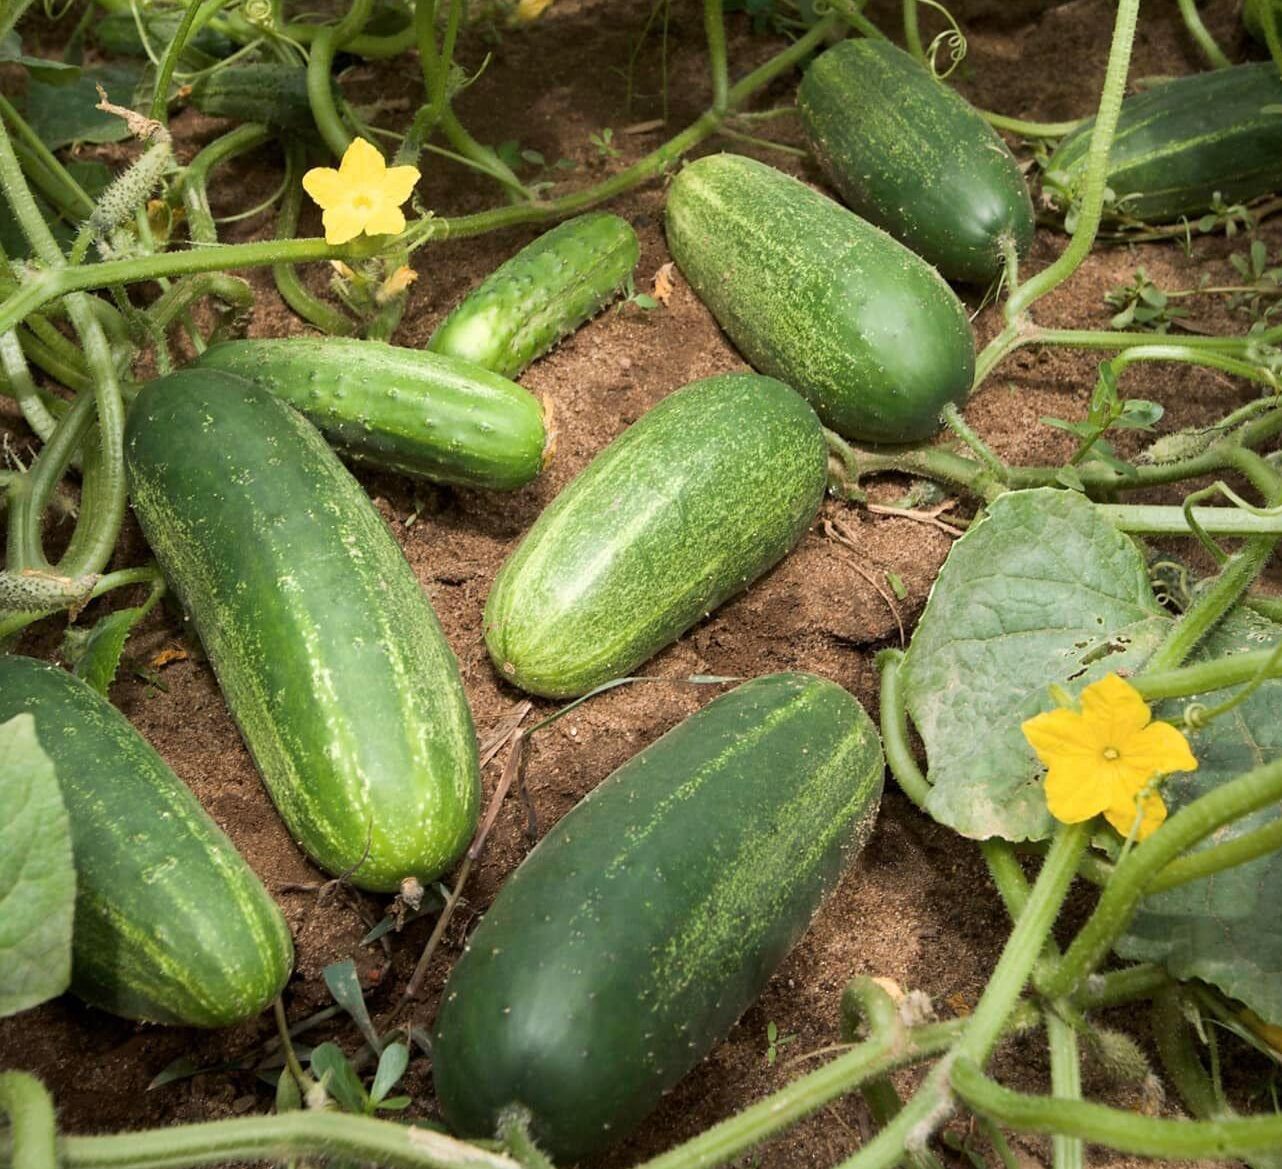 Facts about cucumbers